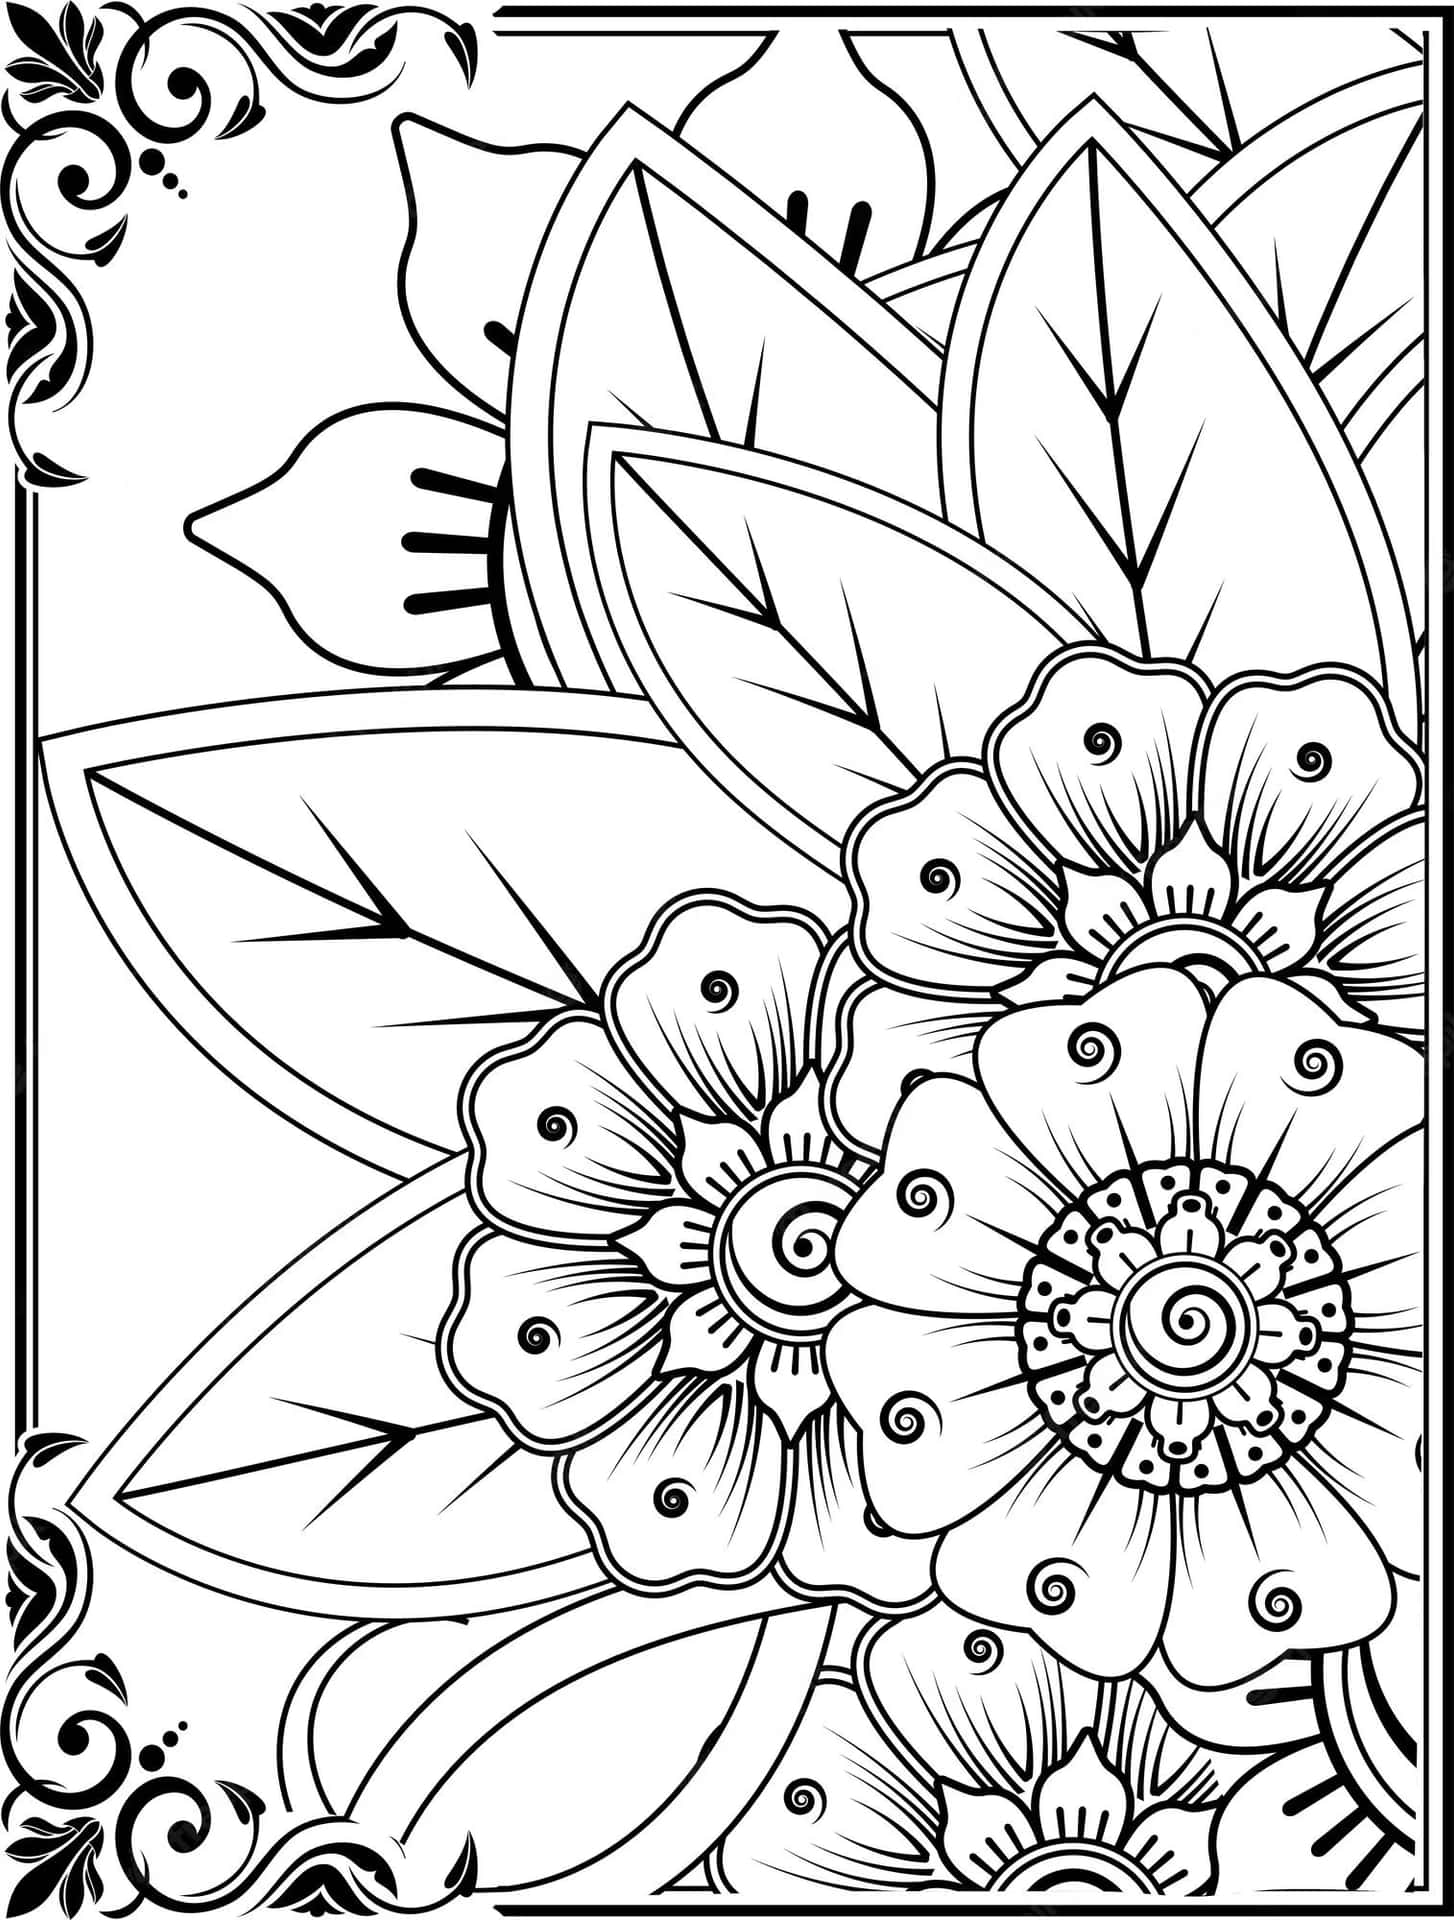 Create a Vibrant Floral Masterpiece with Coloring